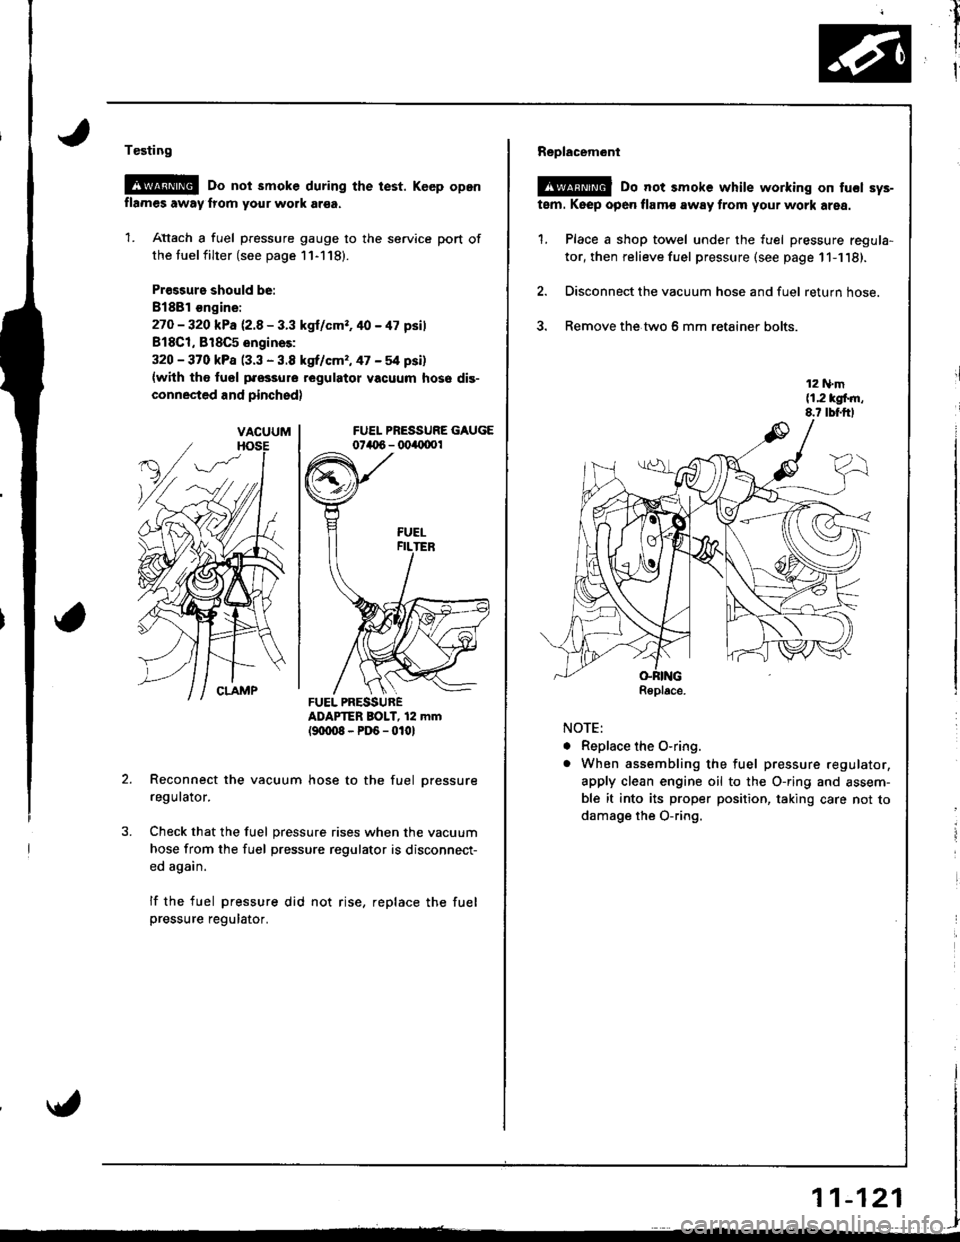 HONDA INTEGRA 1998 4.G Workshop Manual Testing
@G Do not smoke during the test. Keep opon
flames away lrom your work ar€a.
1. Attach a fuel pressure gauge to the service port of
the tuel filter (see page 11-118).
Pr€ssurs should be:
81